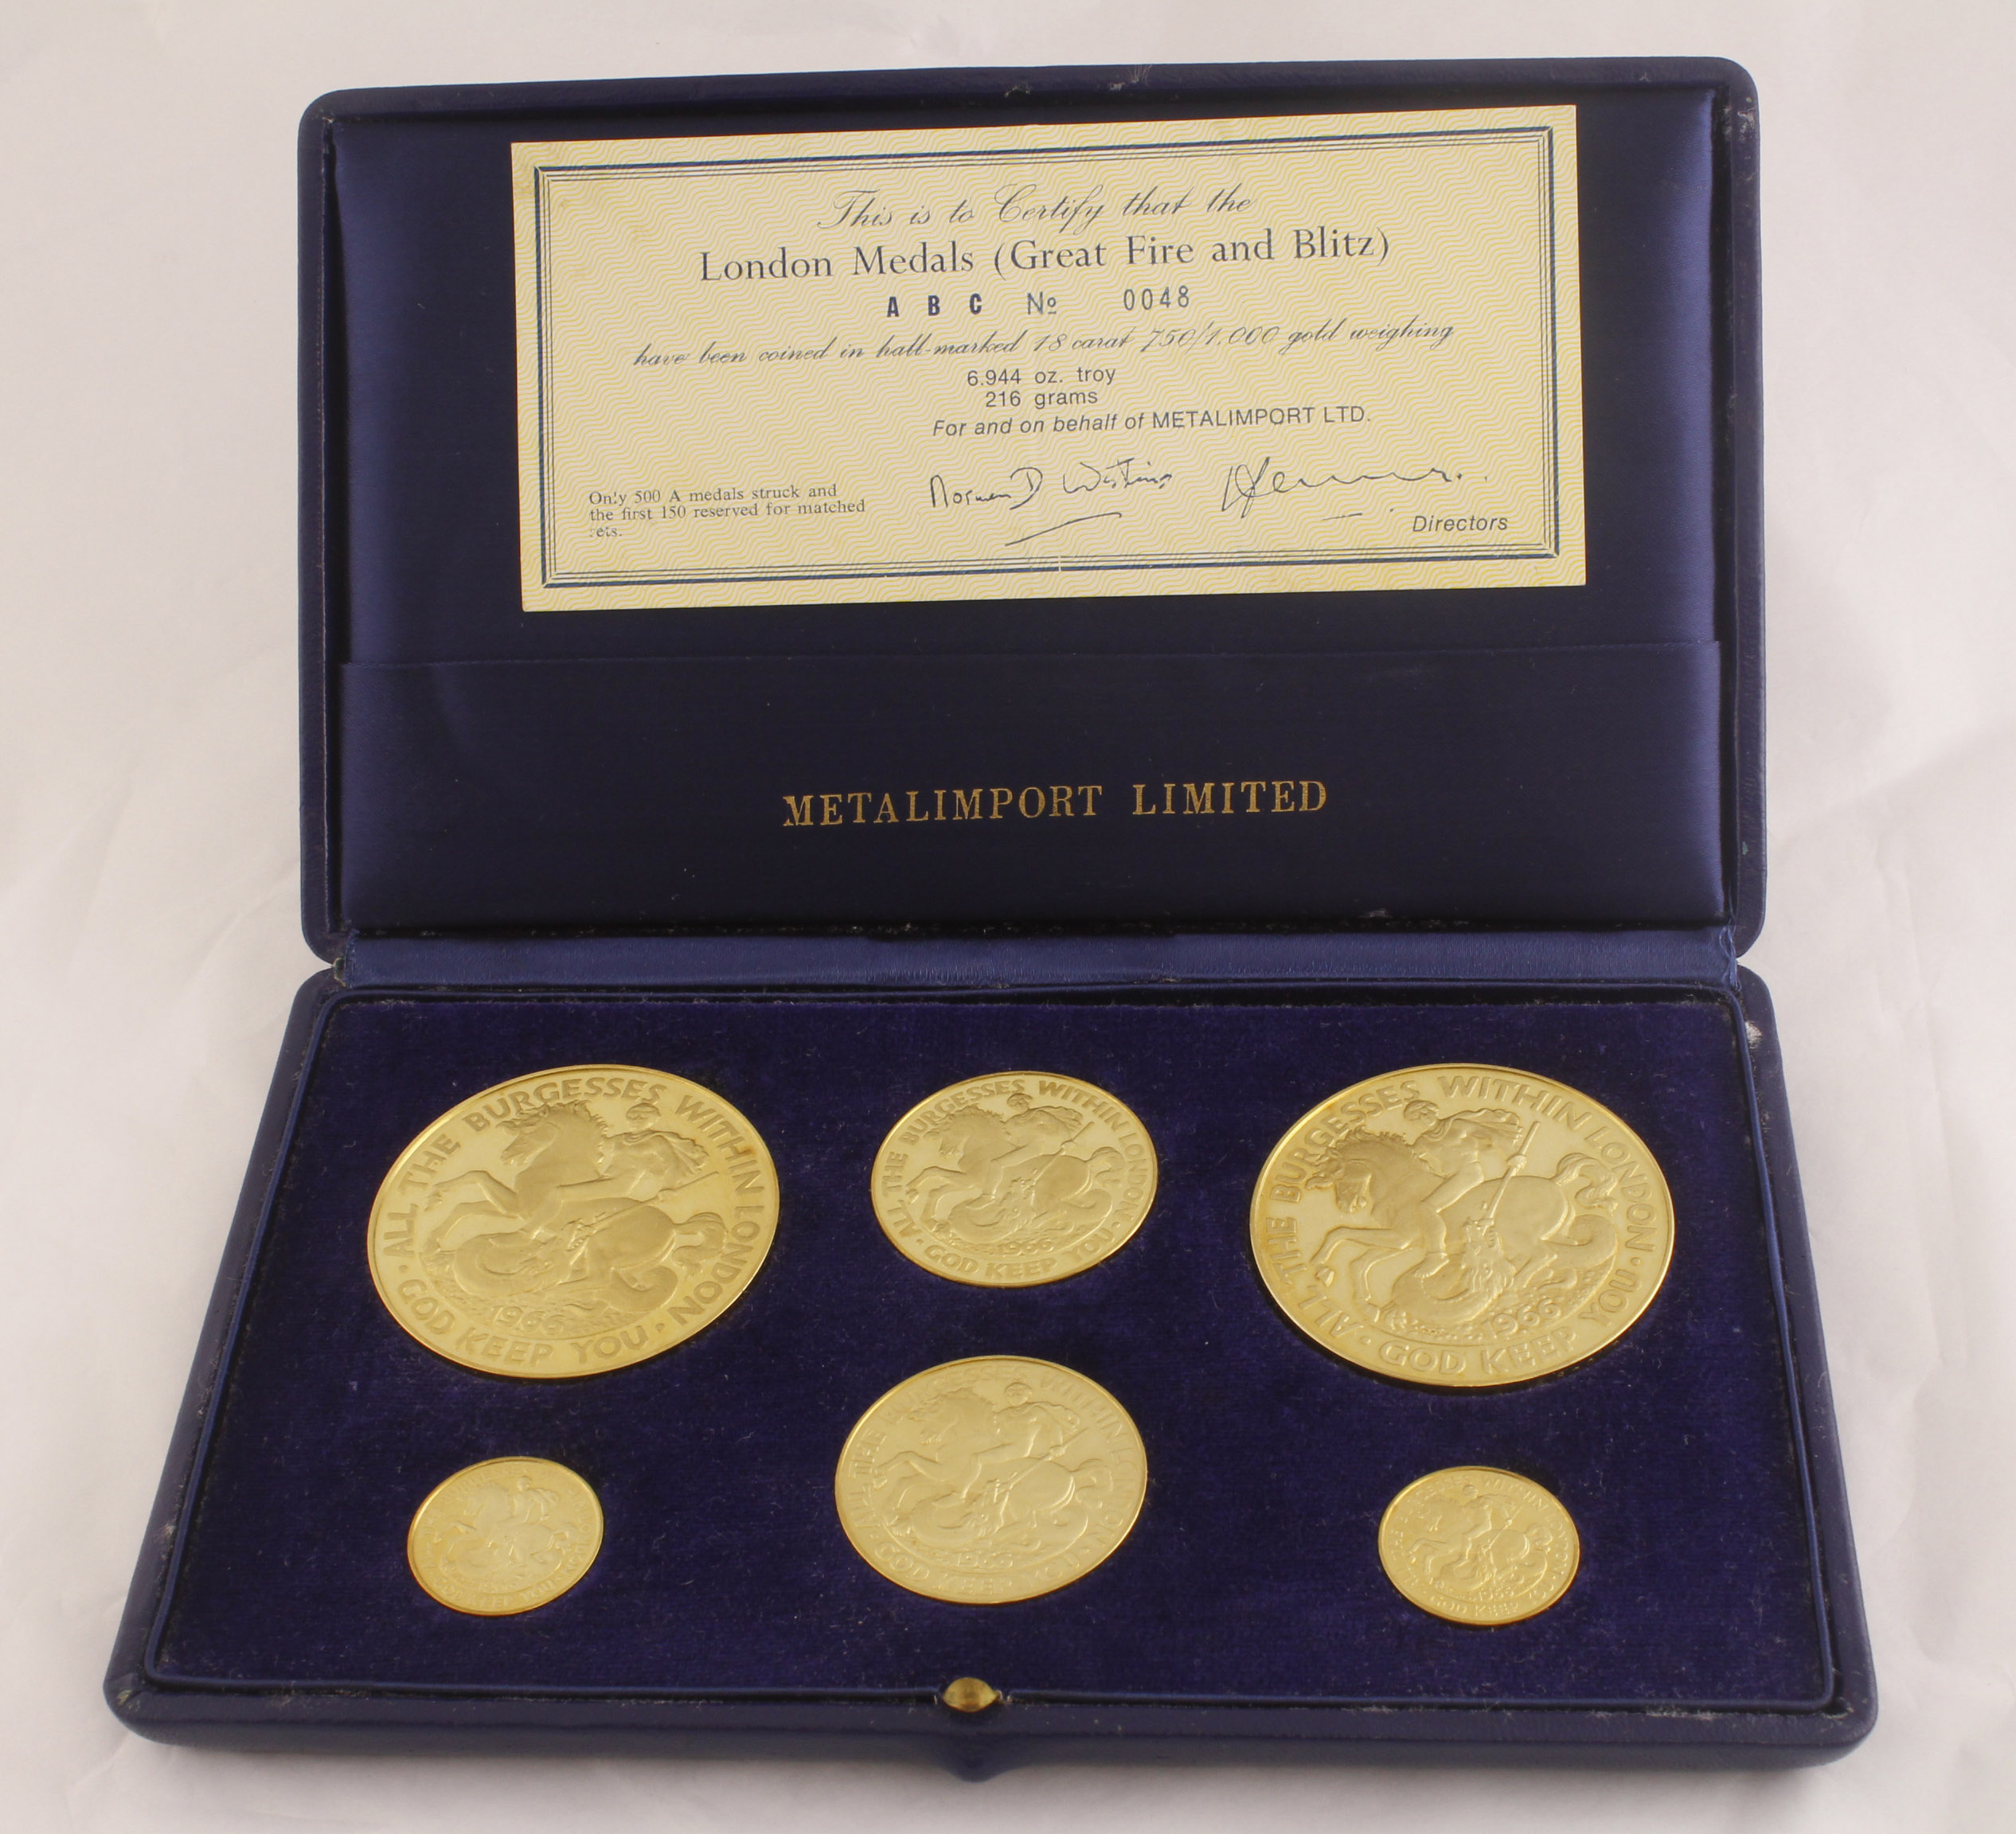 A cased set of six 18ct H/M medallions by Metalimport Ltd commemorating "London Medals (Great Fire